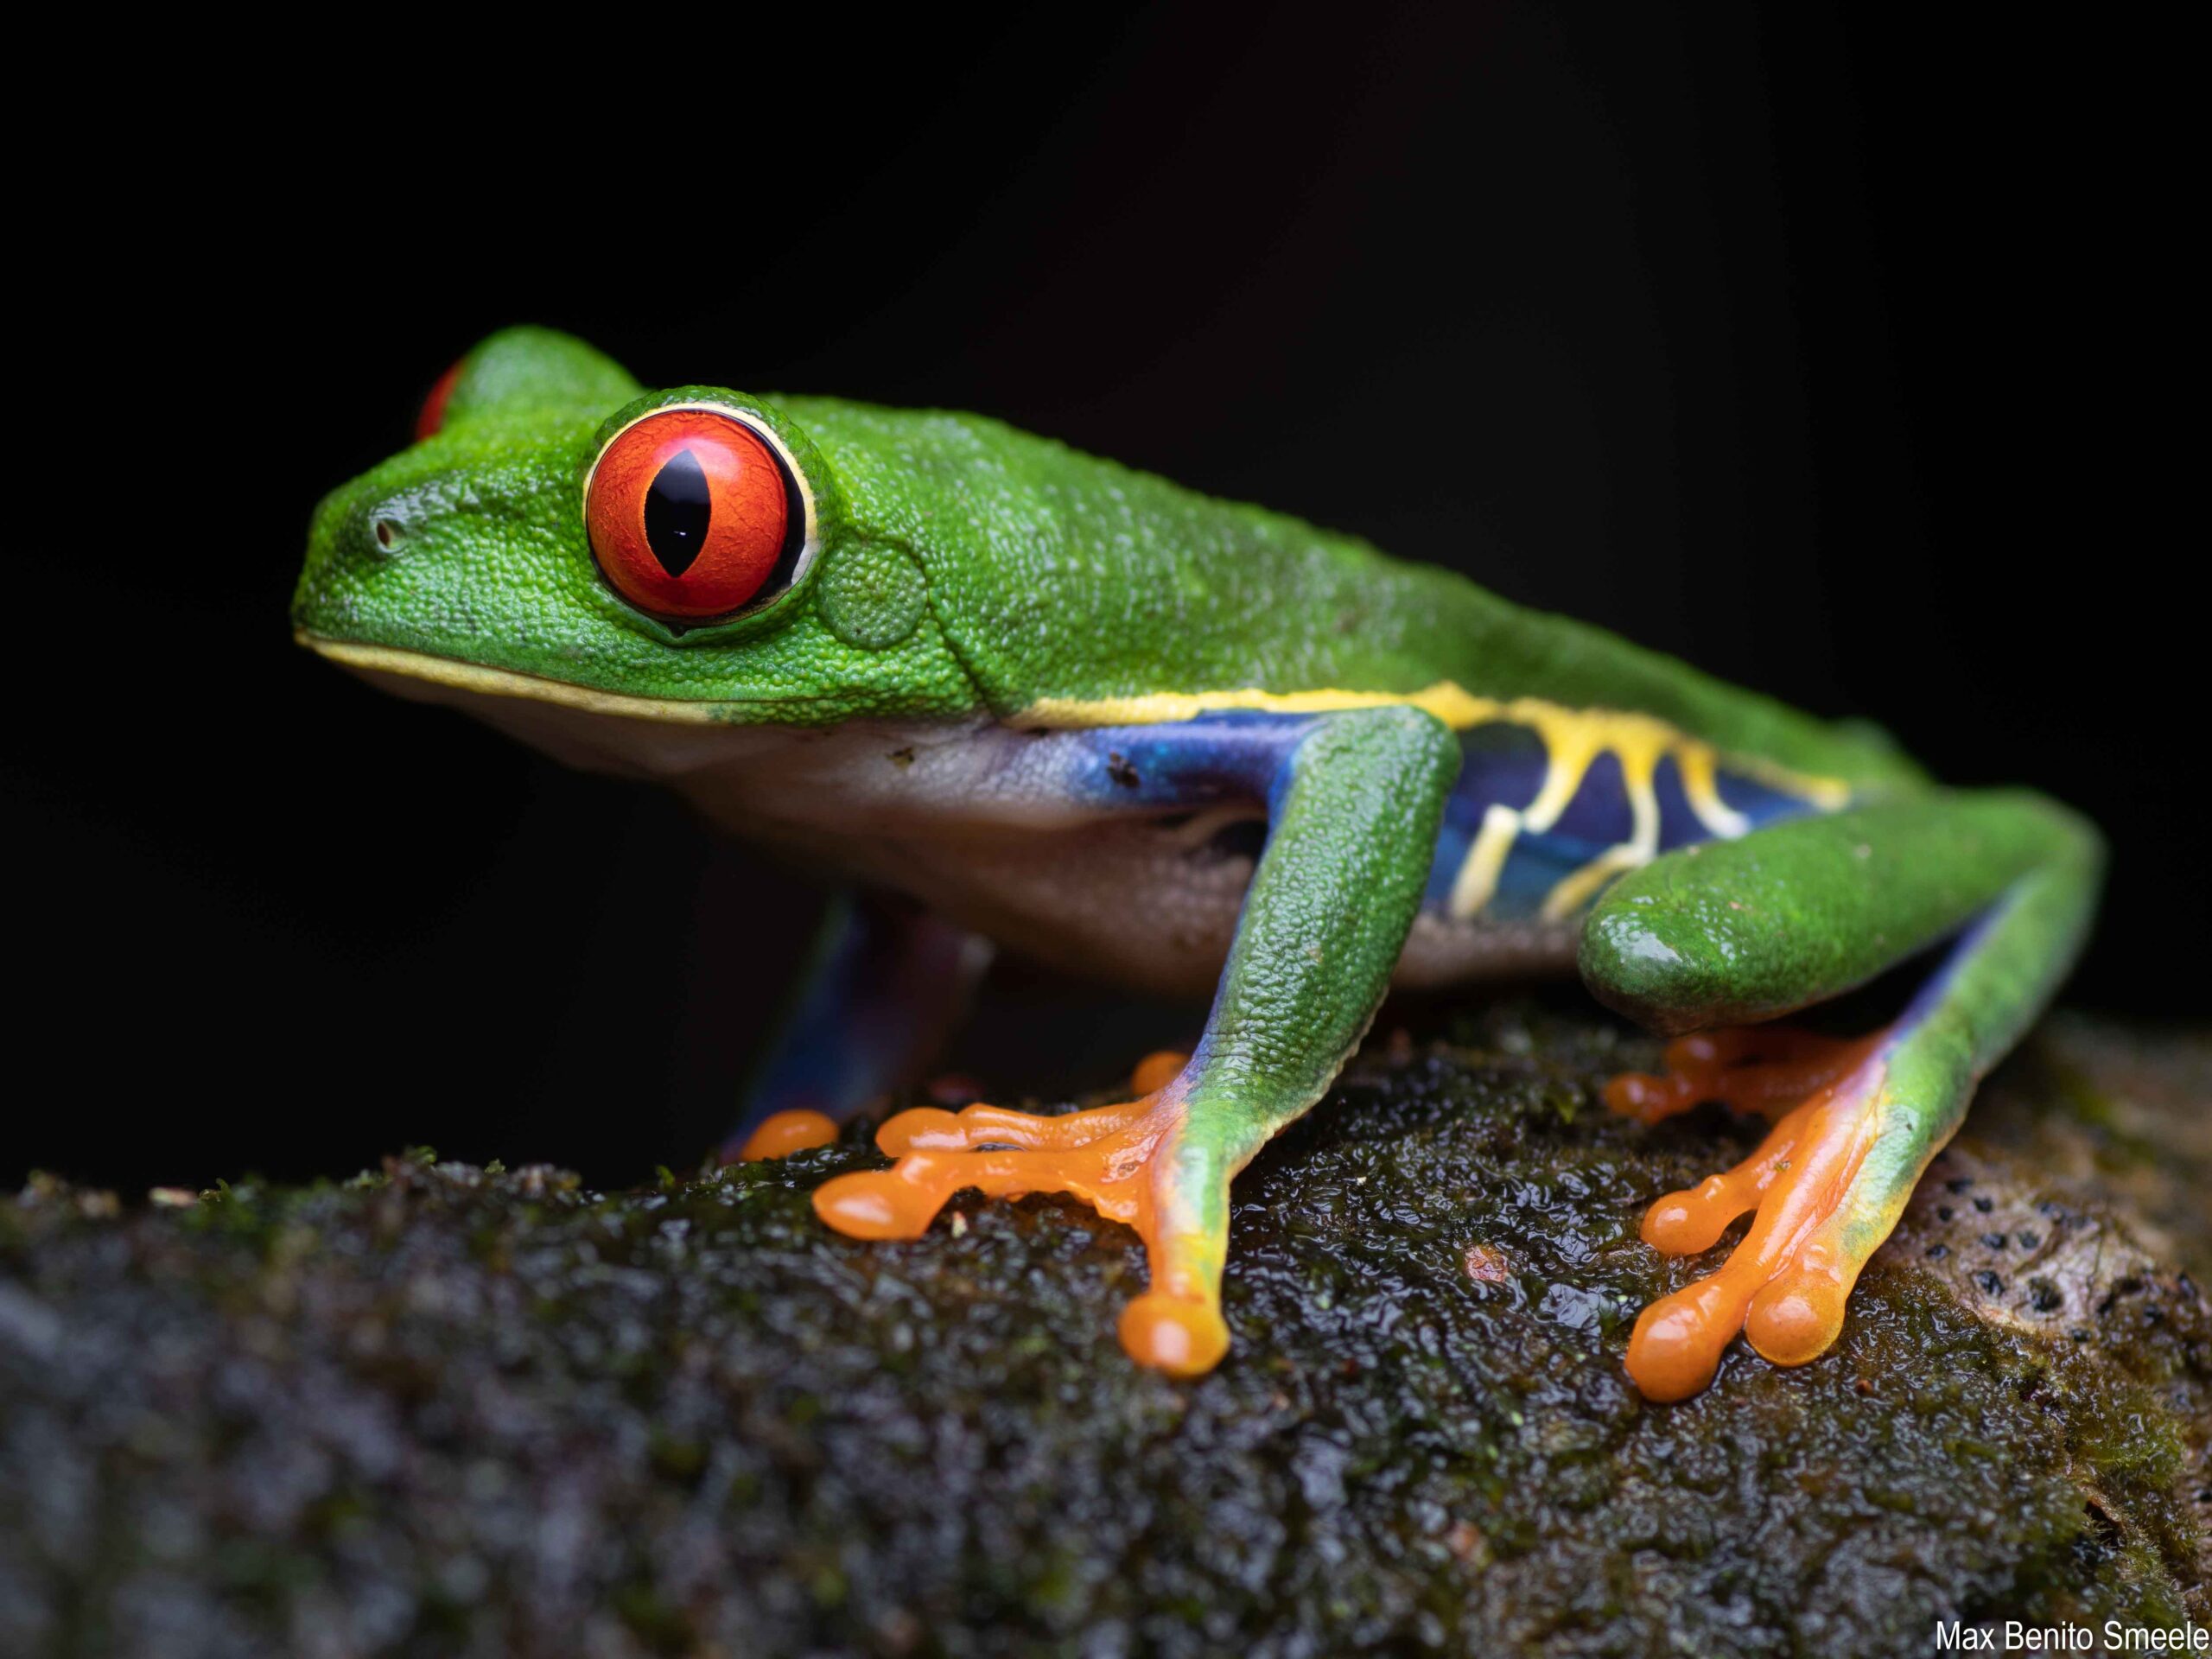 The Iconic Red eyed treefrog from Costa Rica